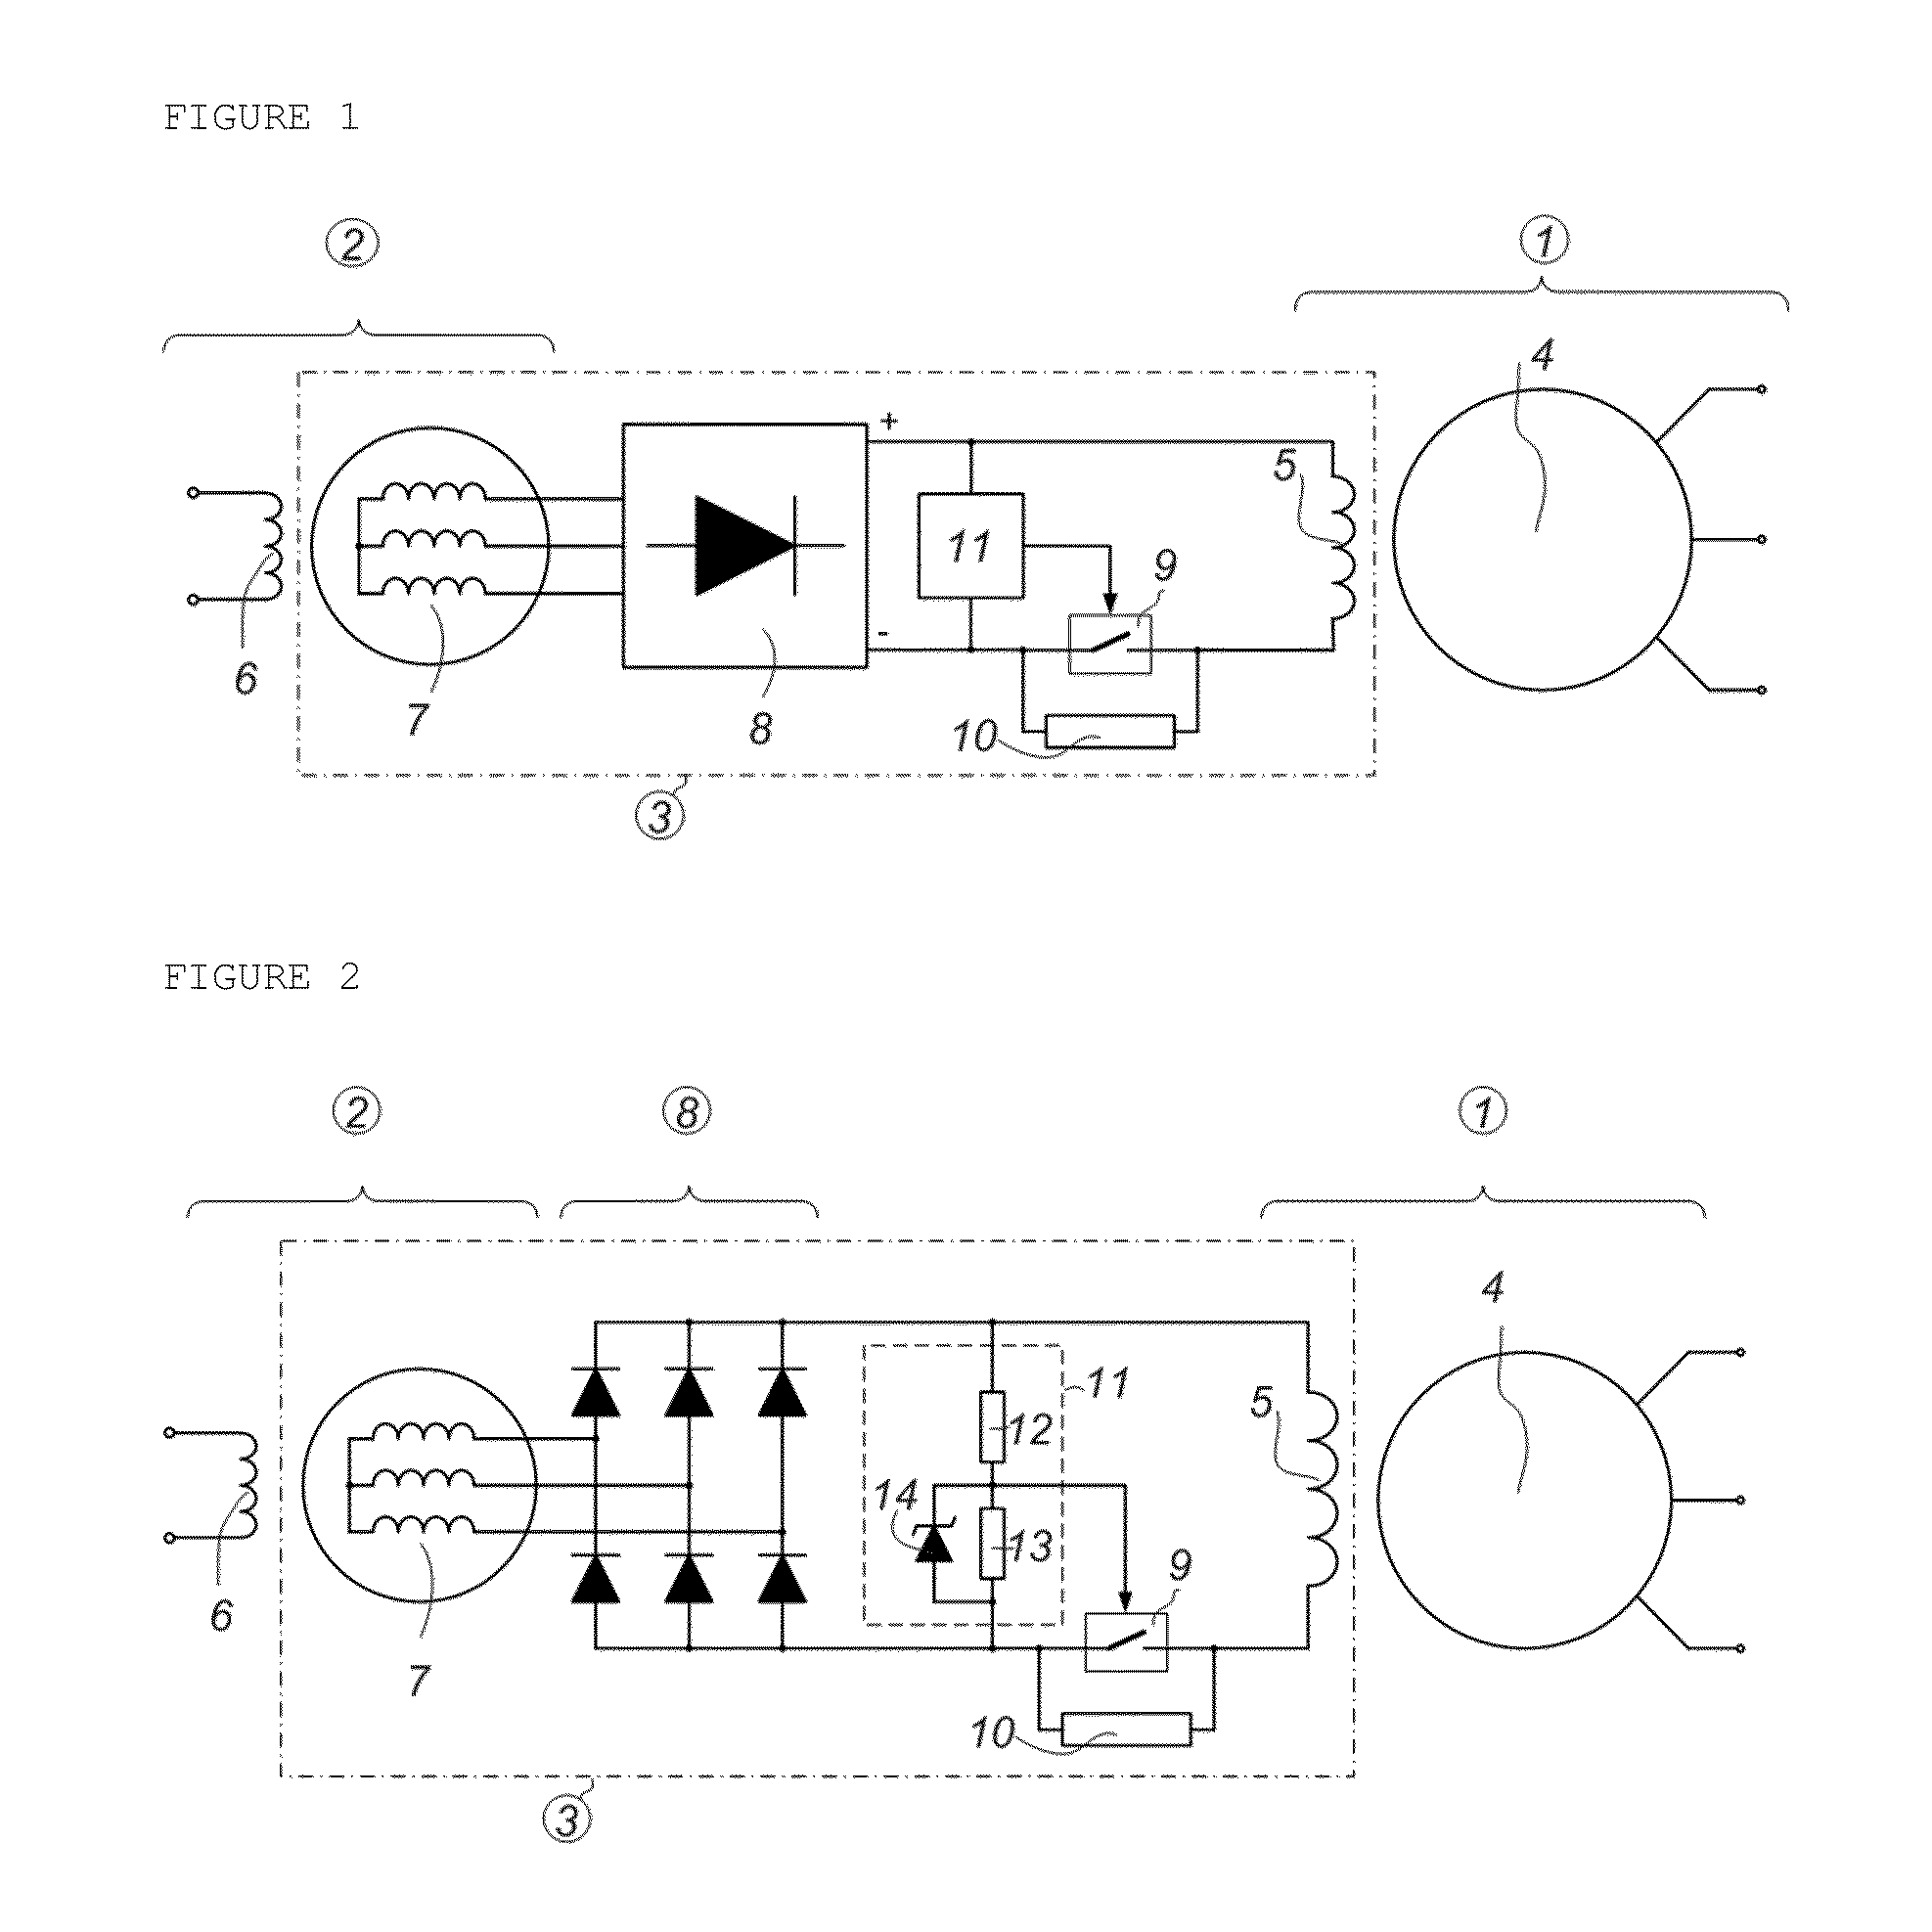 Rapid de-excitation system for synchronous machines with indirect excitation